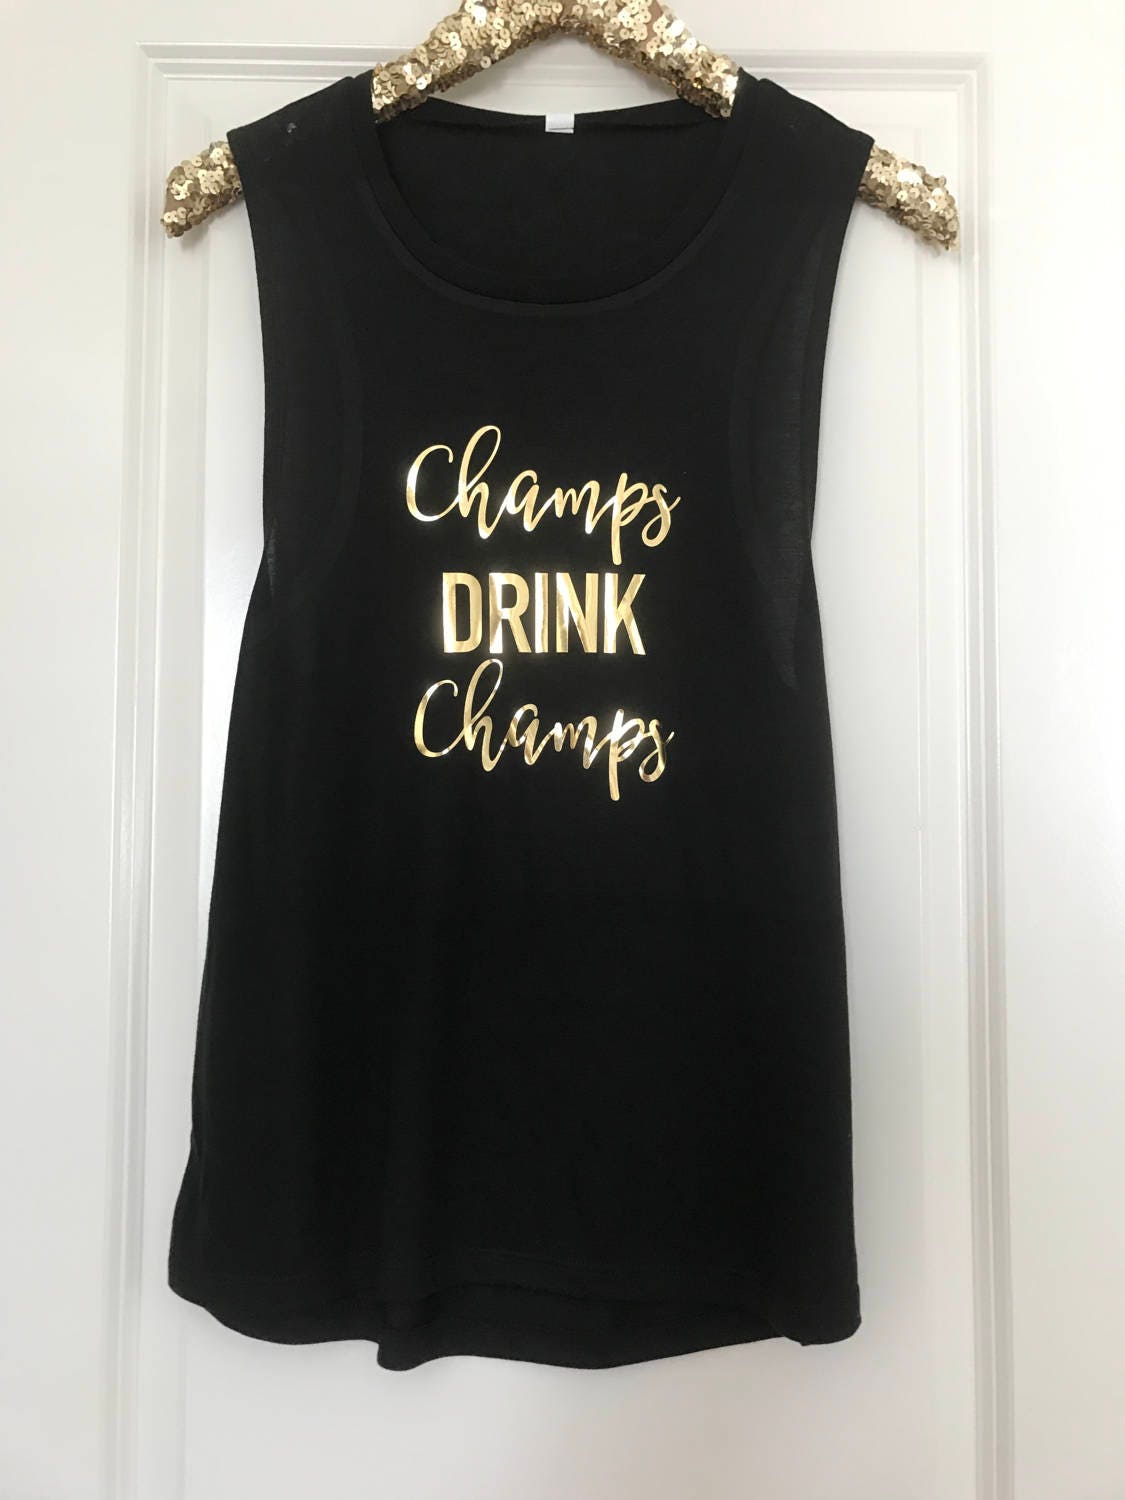 Brides Champs Drink Champs Flowy Muscle Tank // Bachelorette Party / Bridal Shower / Bride to be / Champagne / Rose / Merlot / Wine / 8803